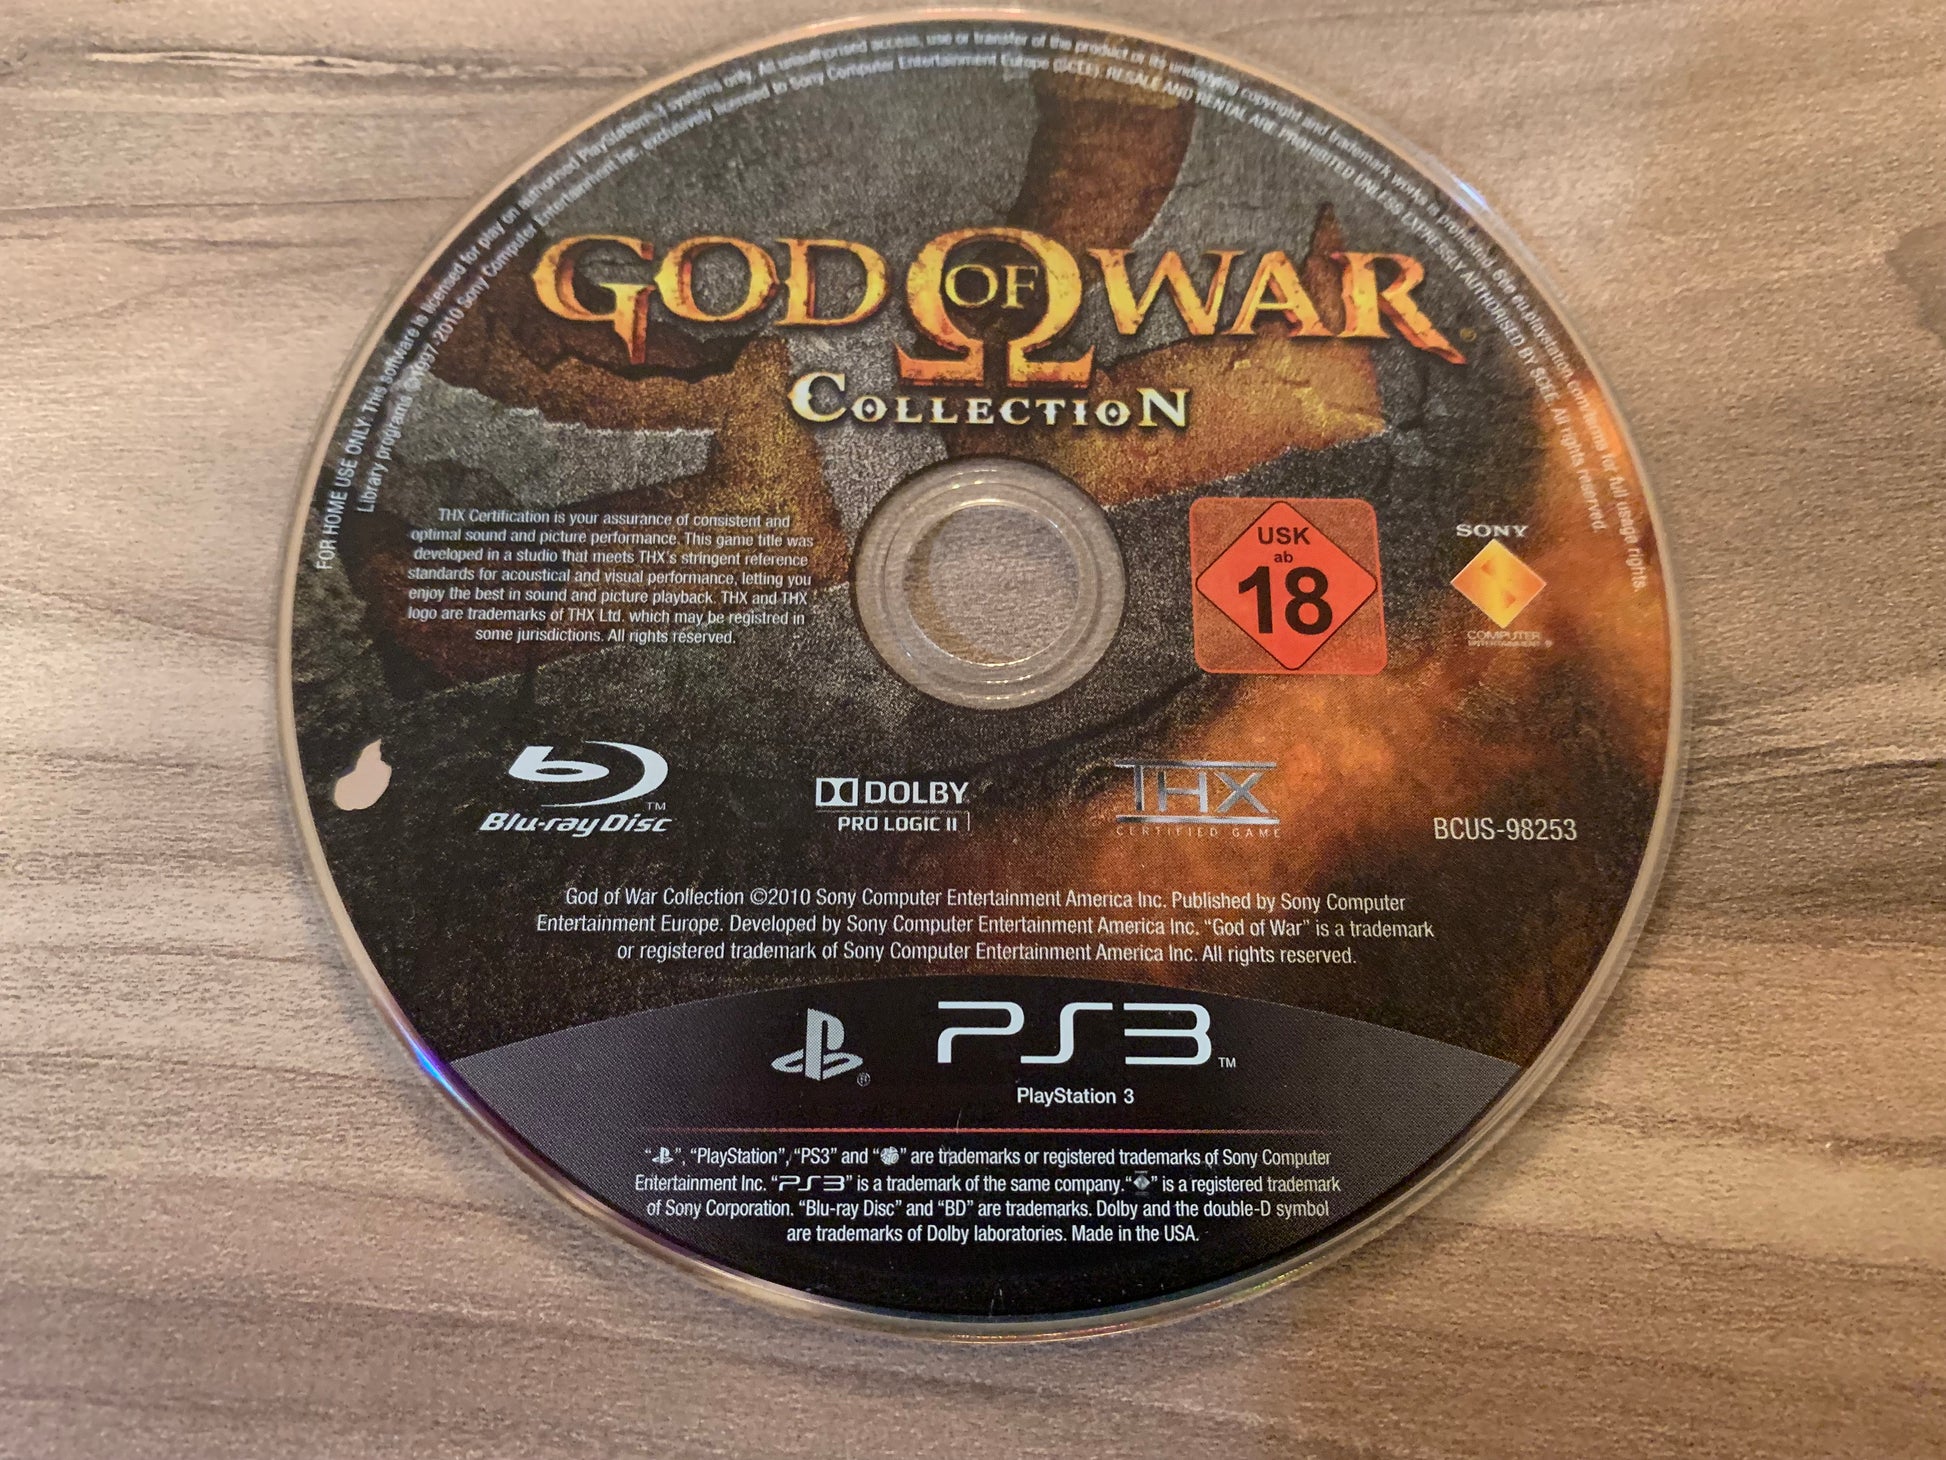 PiXEL-RETRO.COM : SONY PLAYSTATION 3 (PS3) COMPLET CIB BOX MANUAL GAME PAL GOD OF WAR COLLECTION